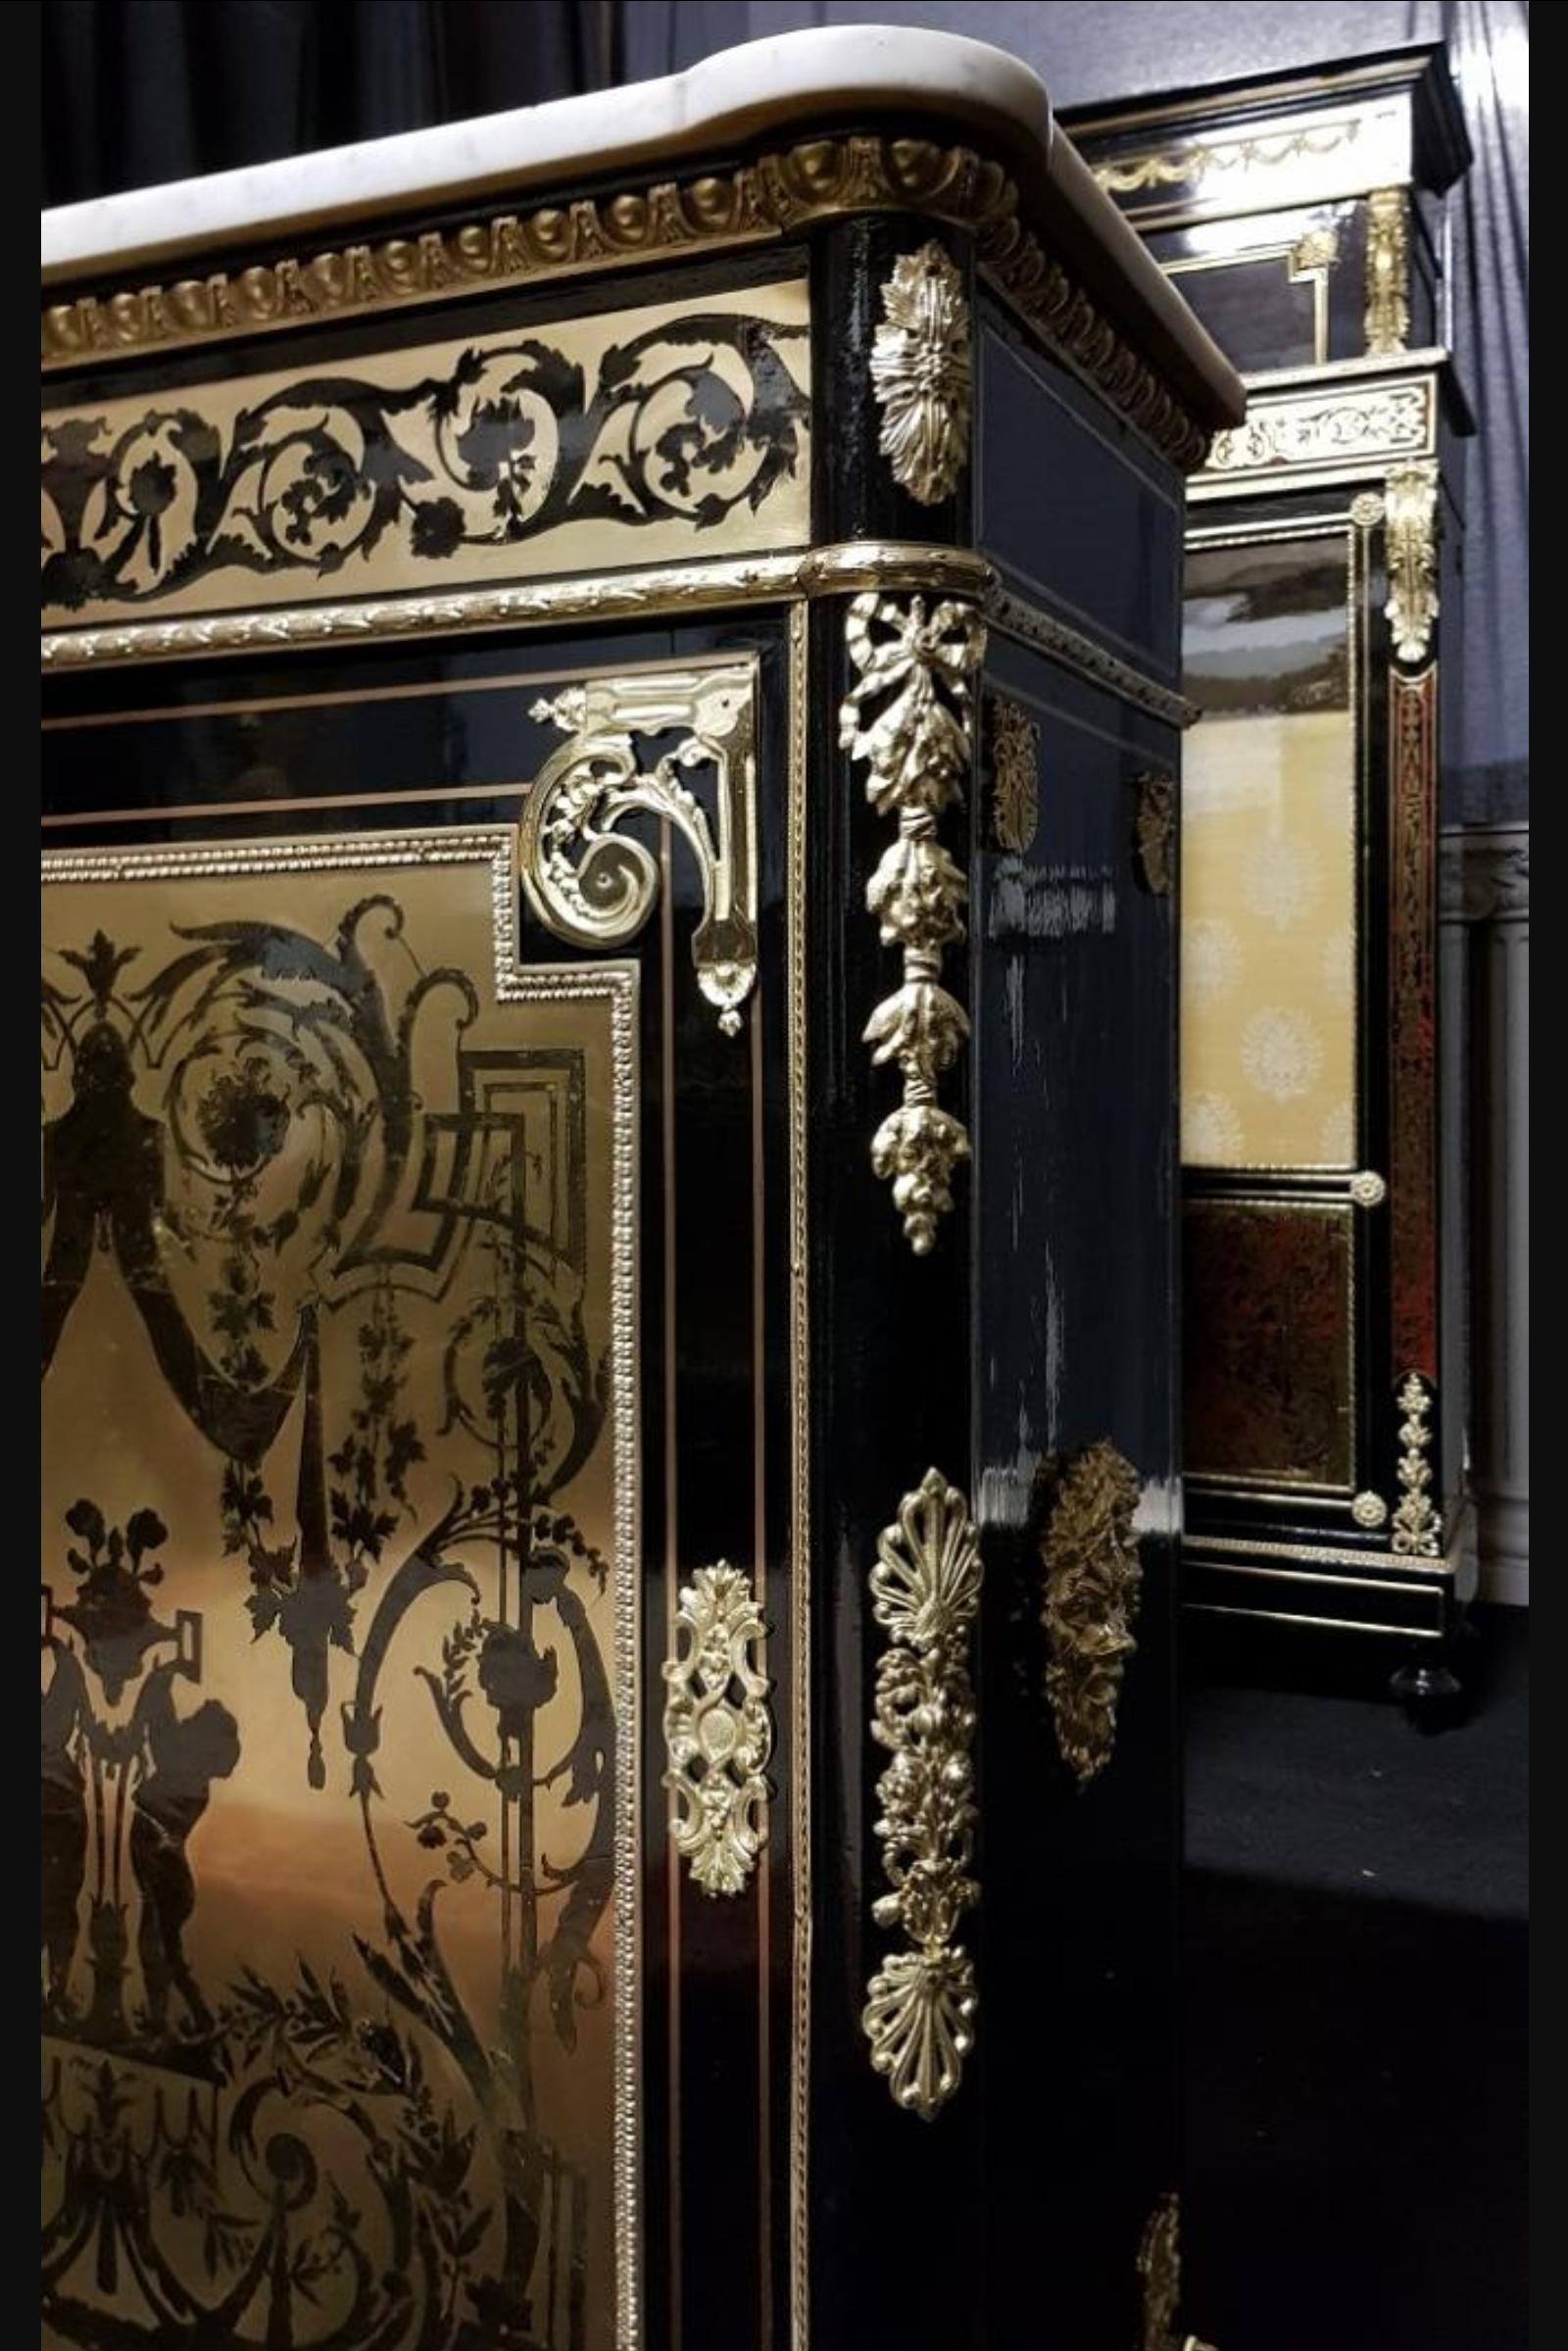 Gorgeous Befort Jeune cabinet in Boulle style marquetry, composed by brass and brown horn. Classic scene of Befort depicting two cherubim under a canopy, framed by scrolls and scrolls foliage. Important ornamentation of gilt bronzes with multiple